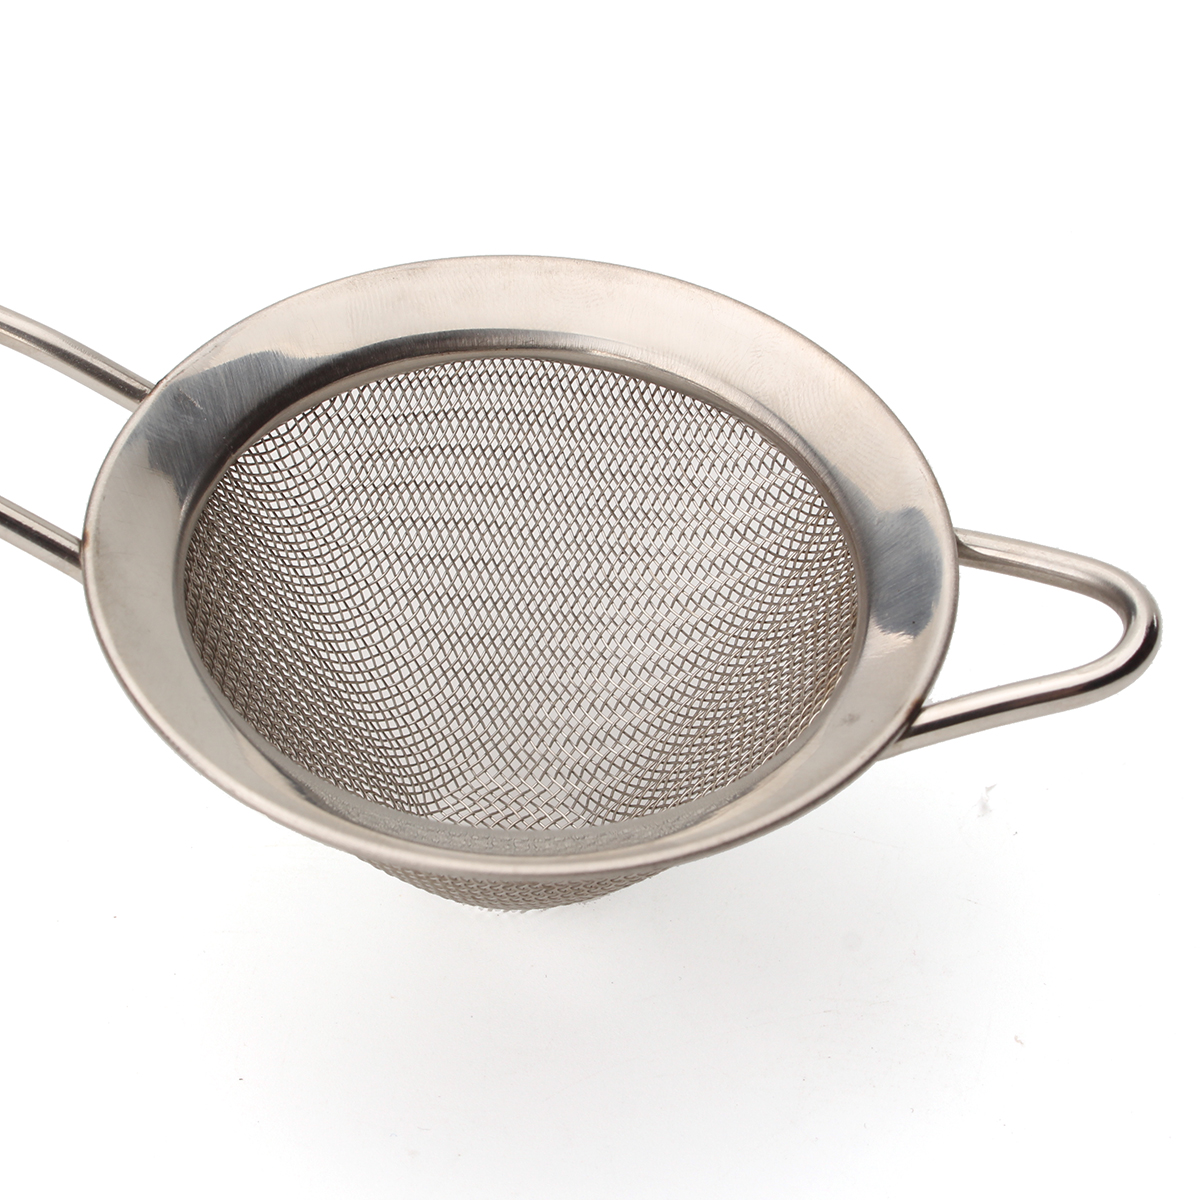 Stainless-Steel-Fine-Mesh-Tea-Cocktail-Strainer-Traditional-Colander-Sifter-Sieve-Filter-Tool-1350767